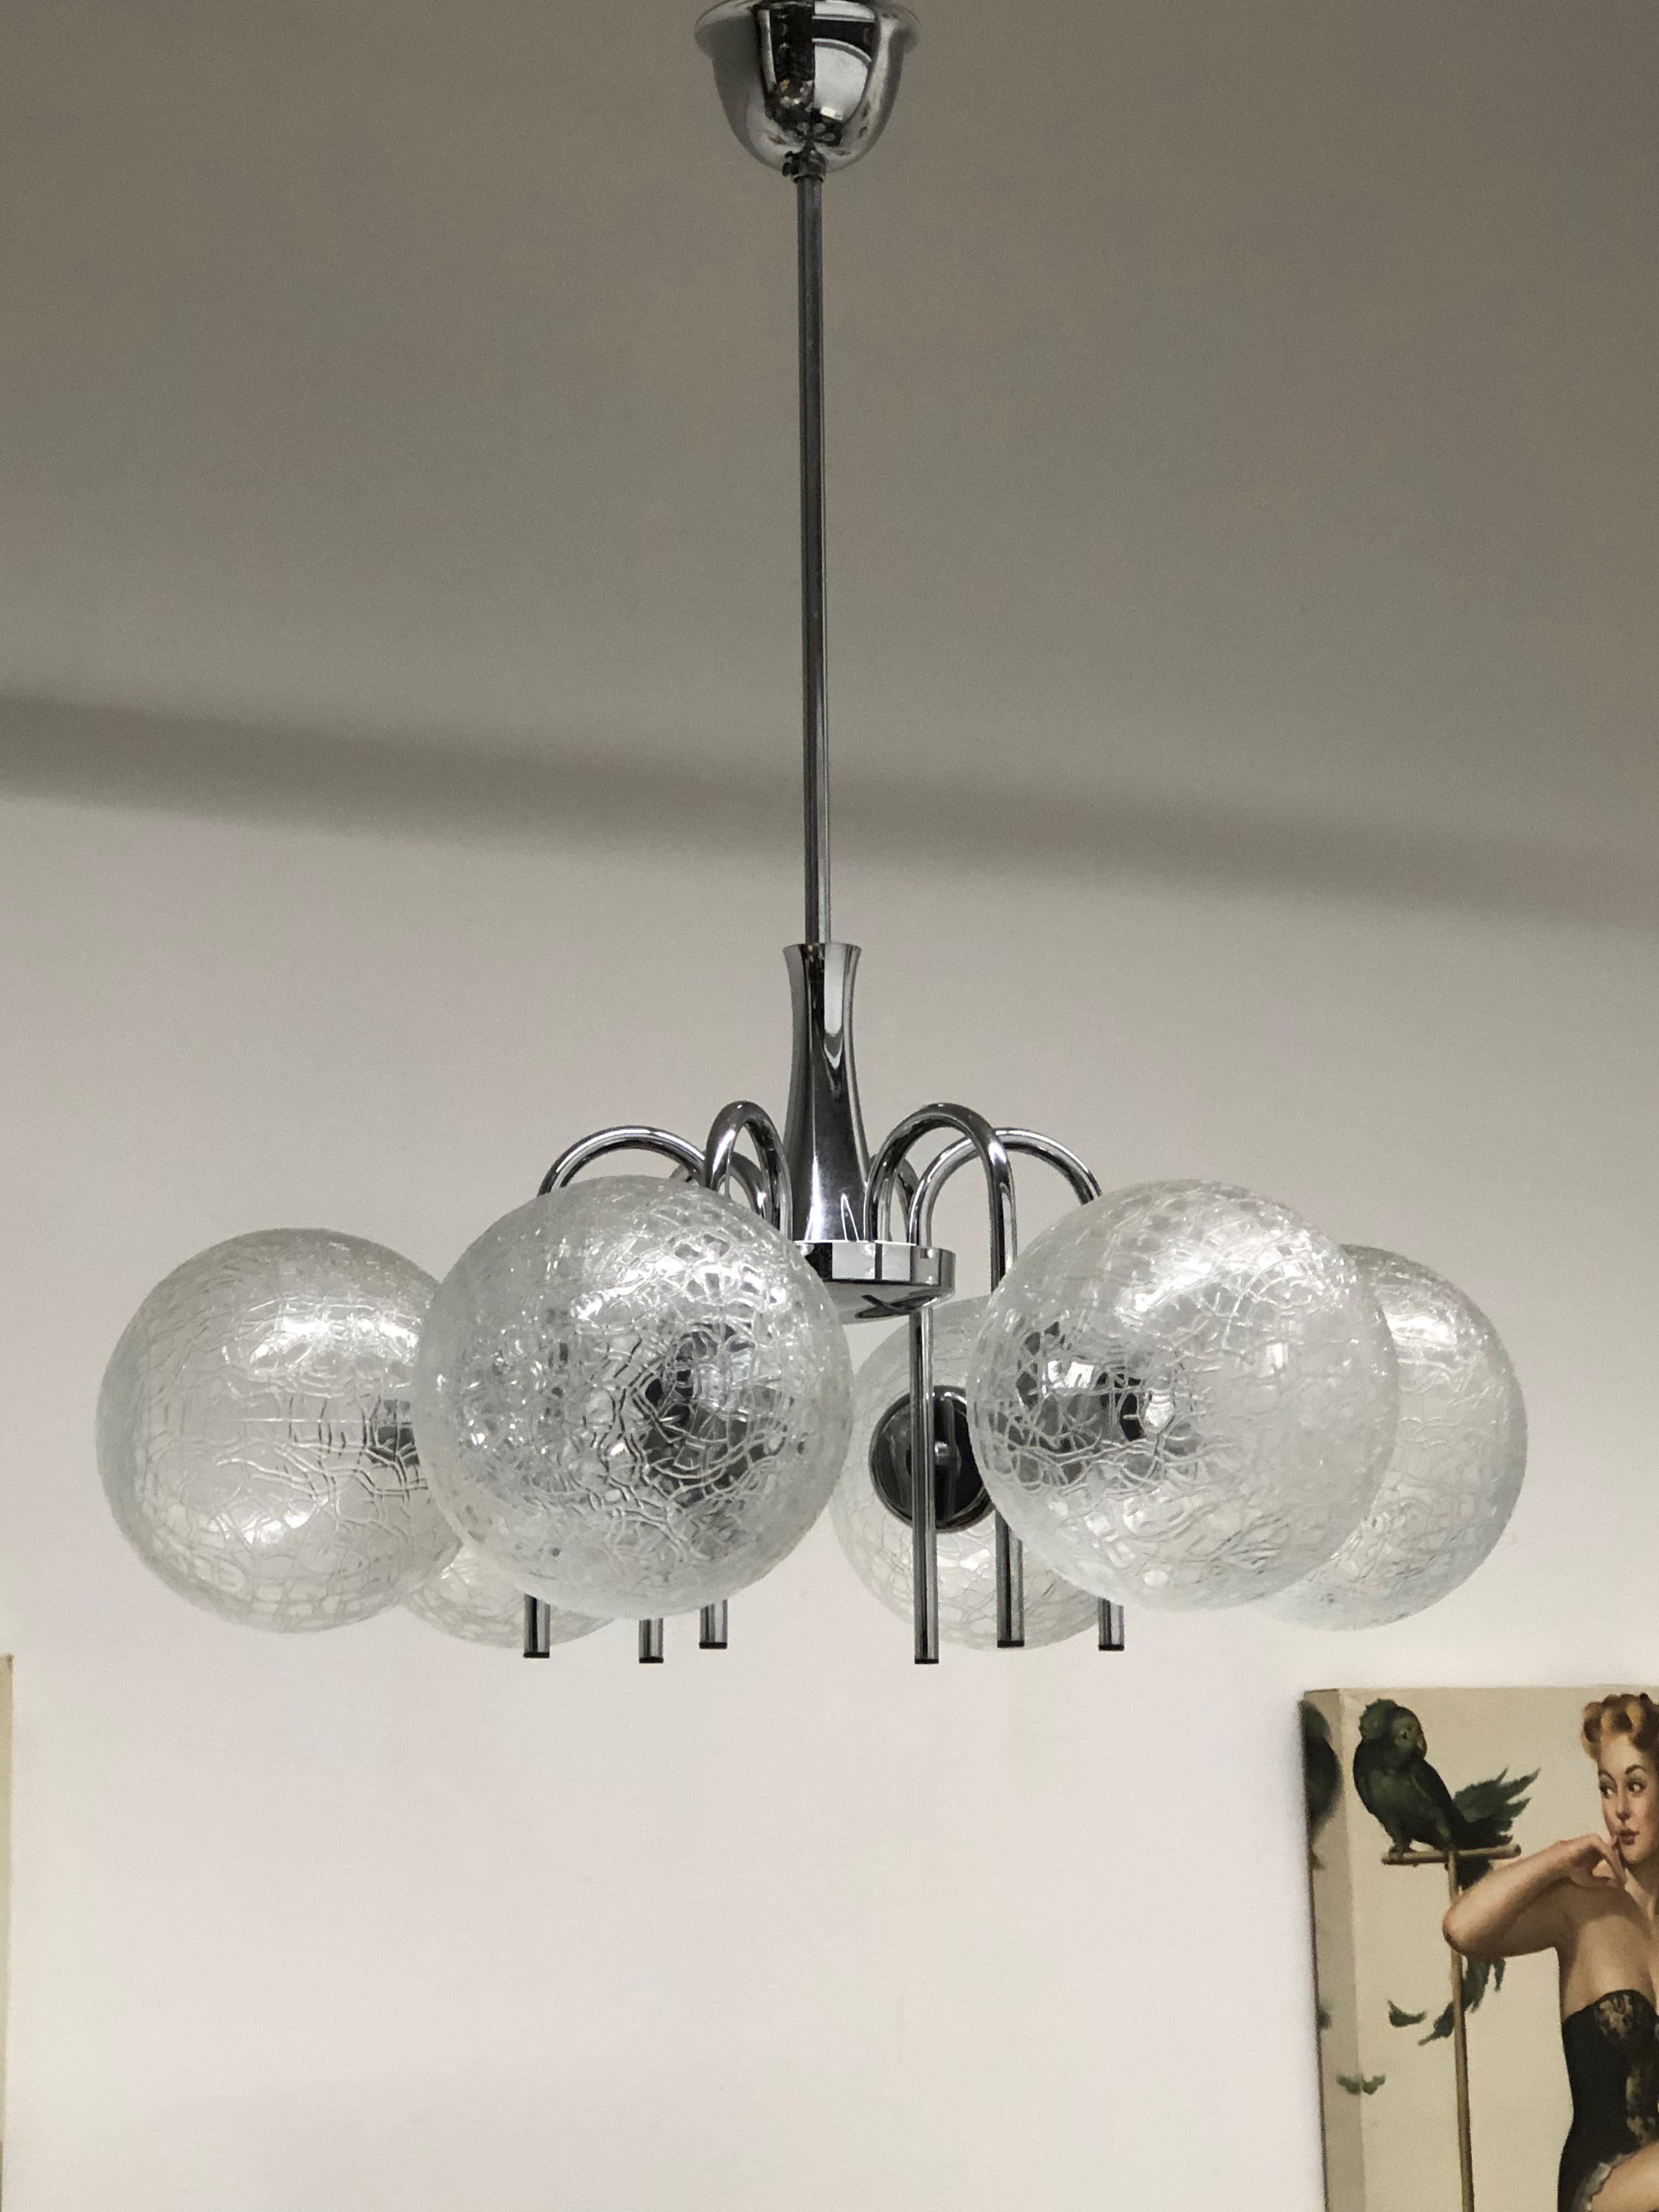 This Mid-Century Modern chandelier was made in the 1960s in Germany. It is made of six unique glass balls mounted on a chrome frame. The fixture requires six European E14 candelabra bulbs, each bulb up to 40 watts.